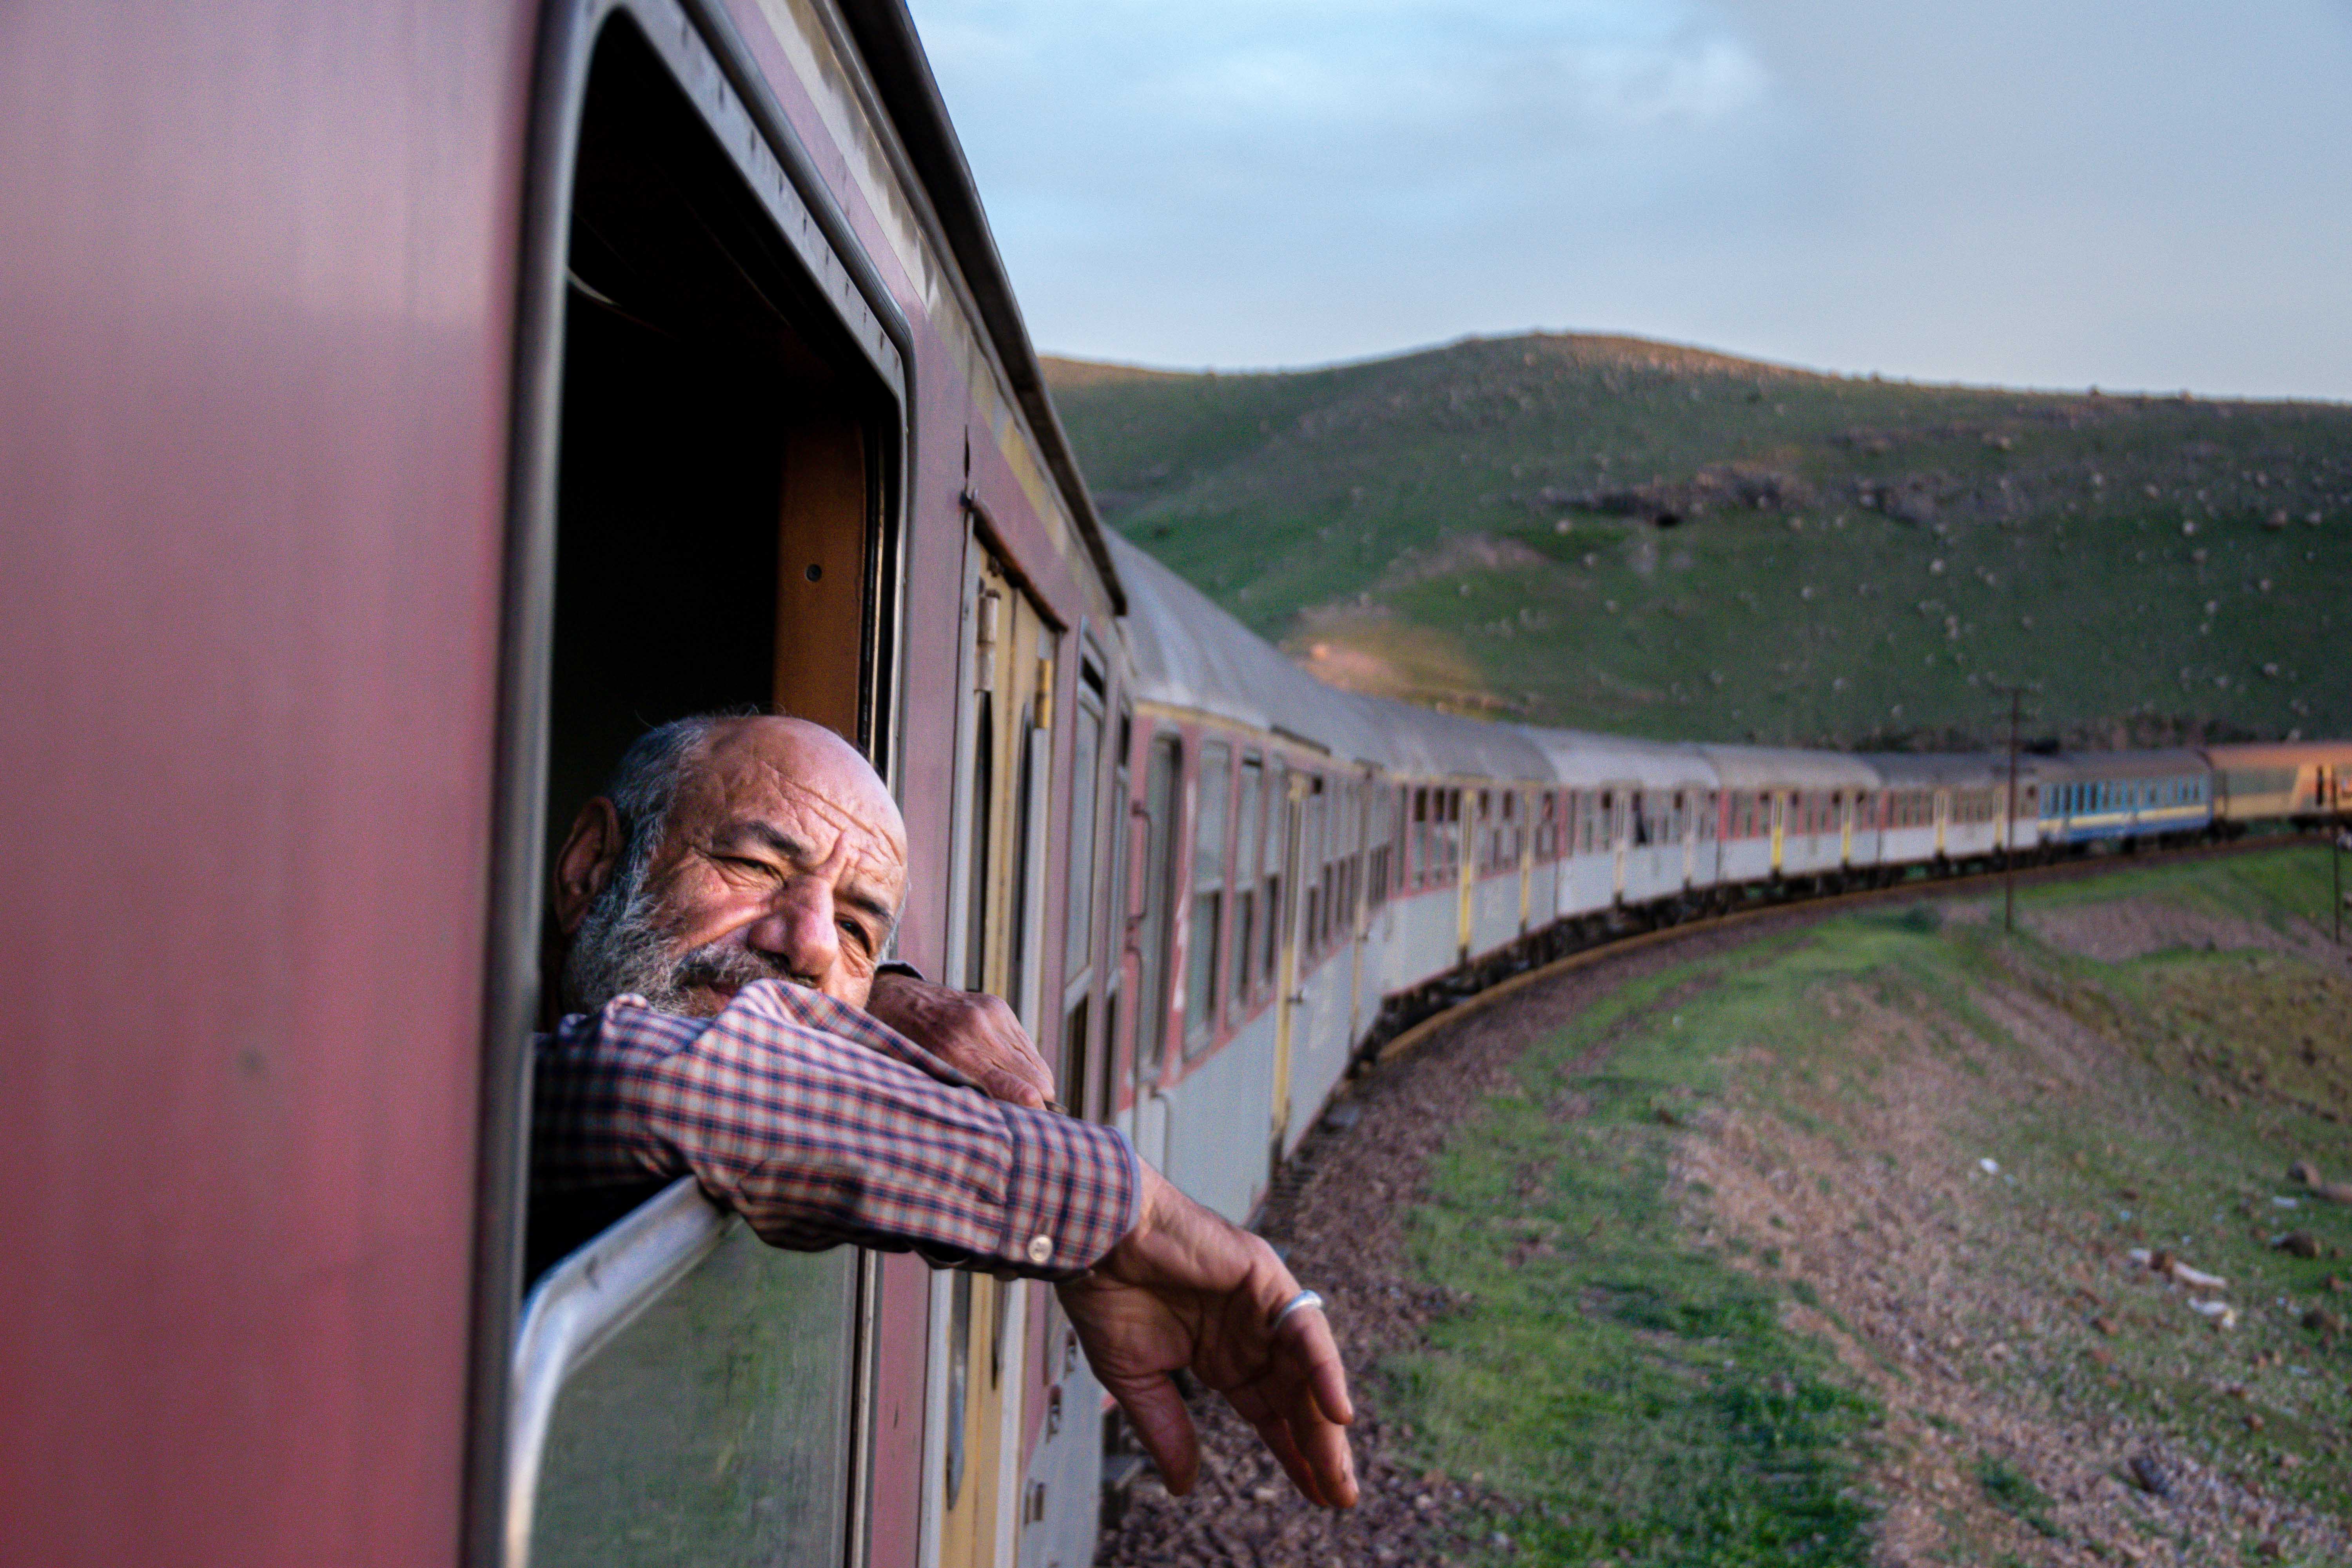 If there was lingering doubt, the Dorud to Andismeshk train journey dispels any final stereotypes one could have of Iran. Over 5 hours and with surreal mountain landscapes around every bend, the locals onboard kept me entertained, humbled, engaged and, as always, well fed – the Iranian Hospitality